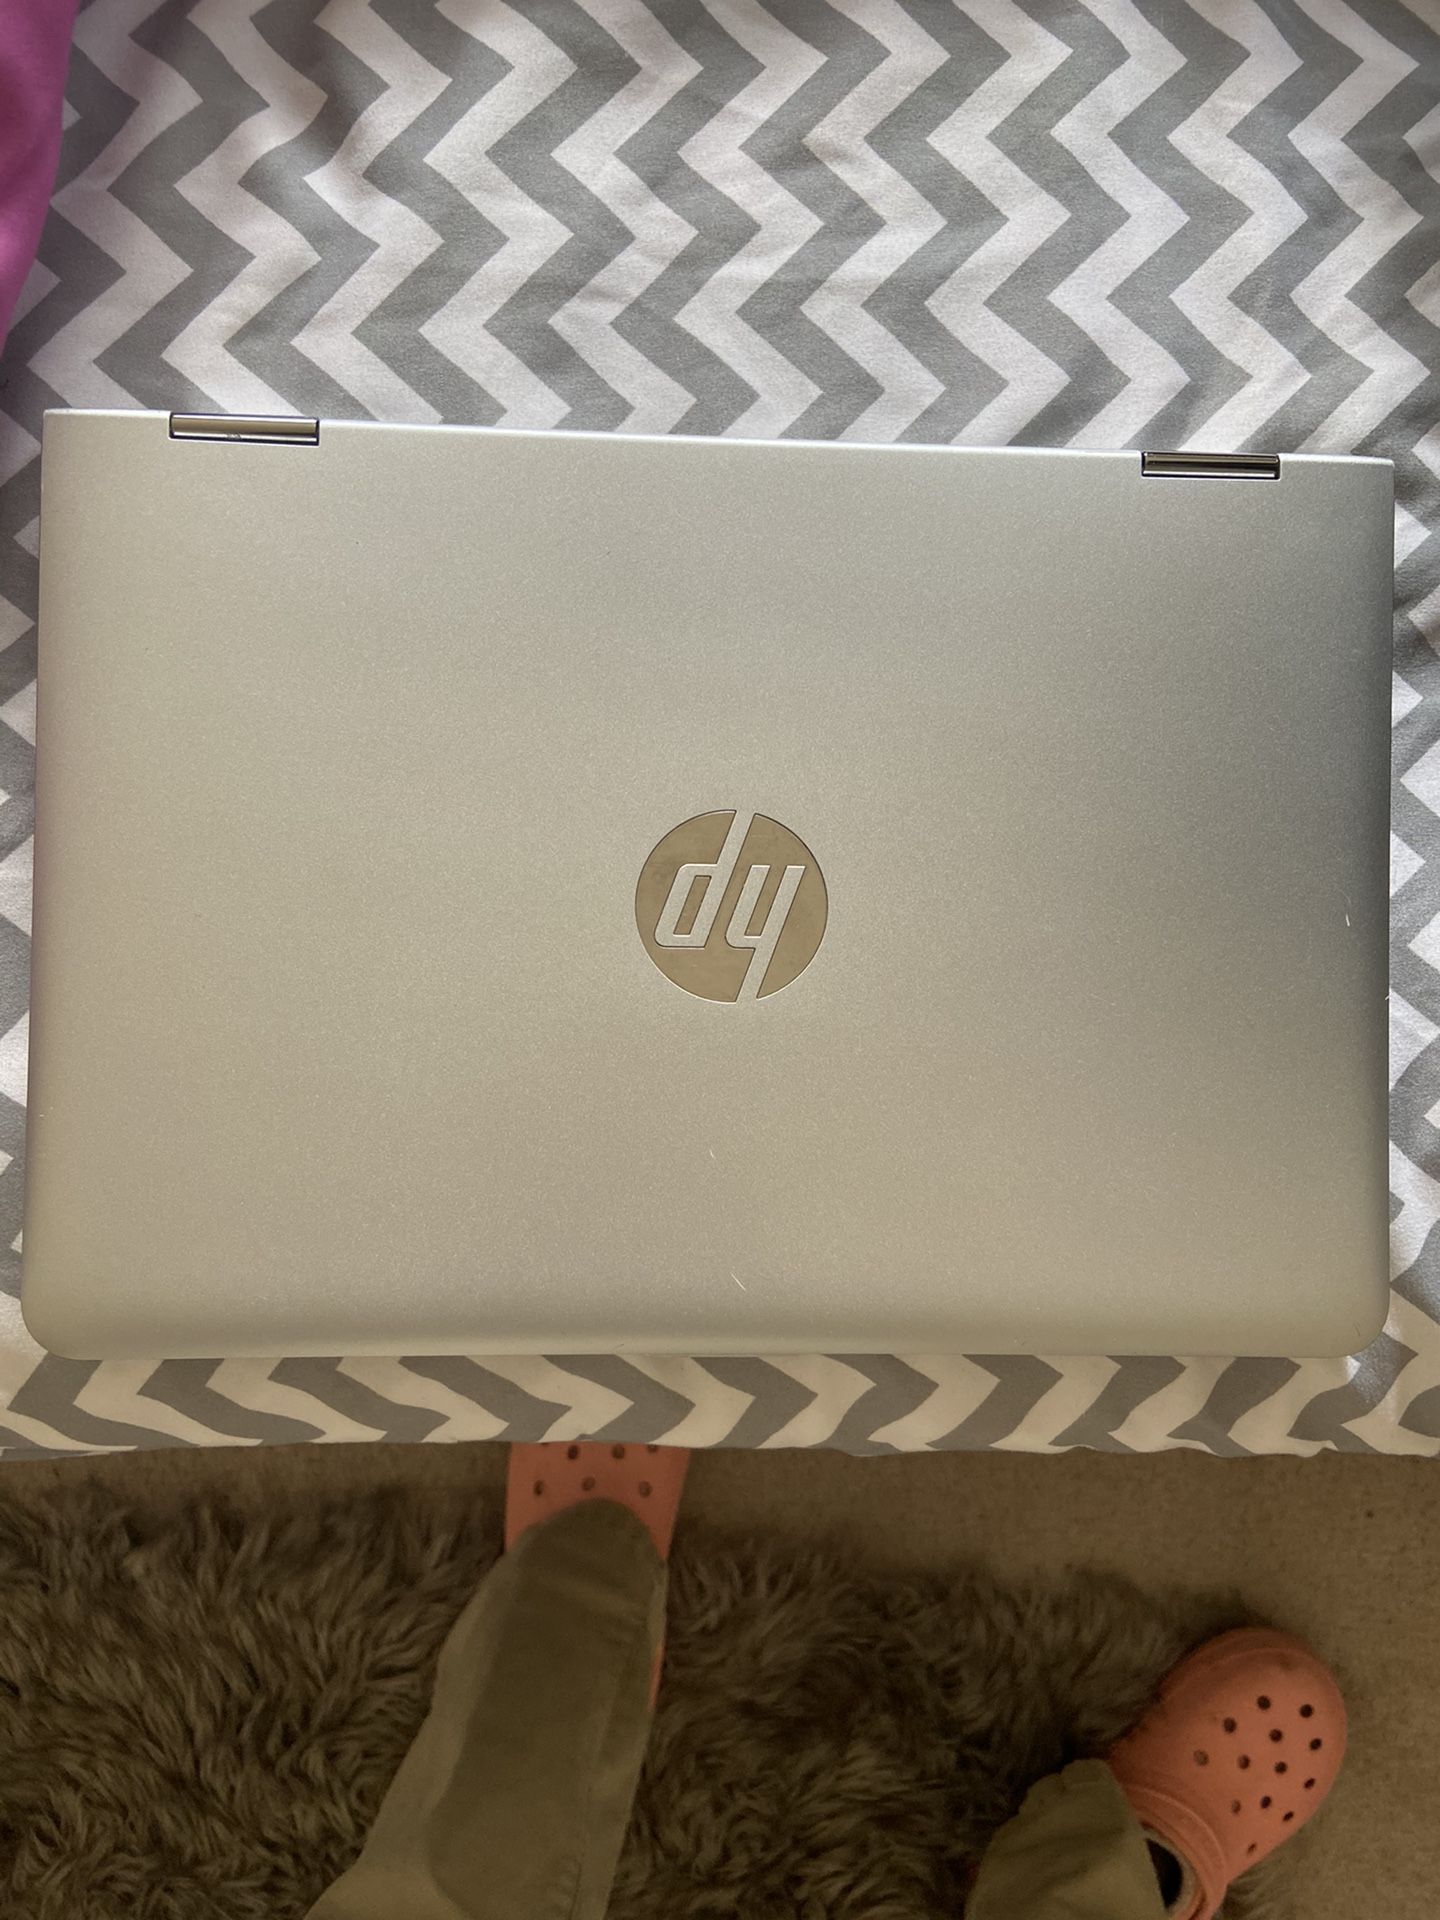 2-in-1 HP Pavilion Touchscreen Laptop